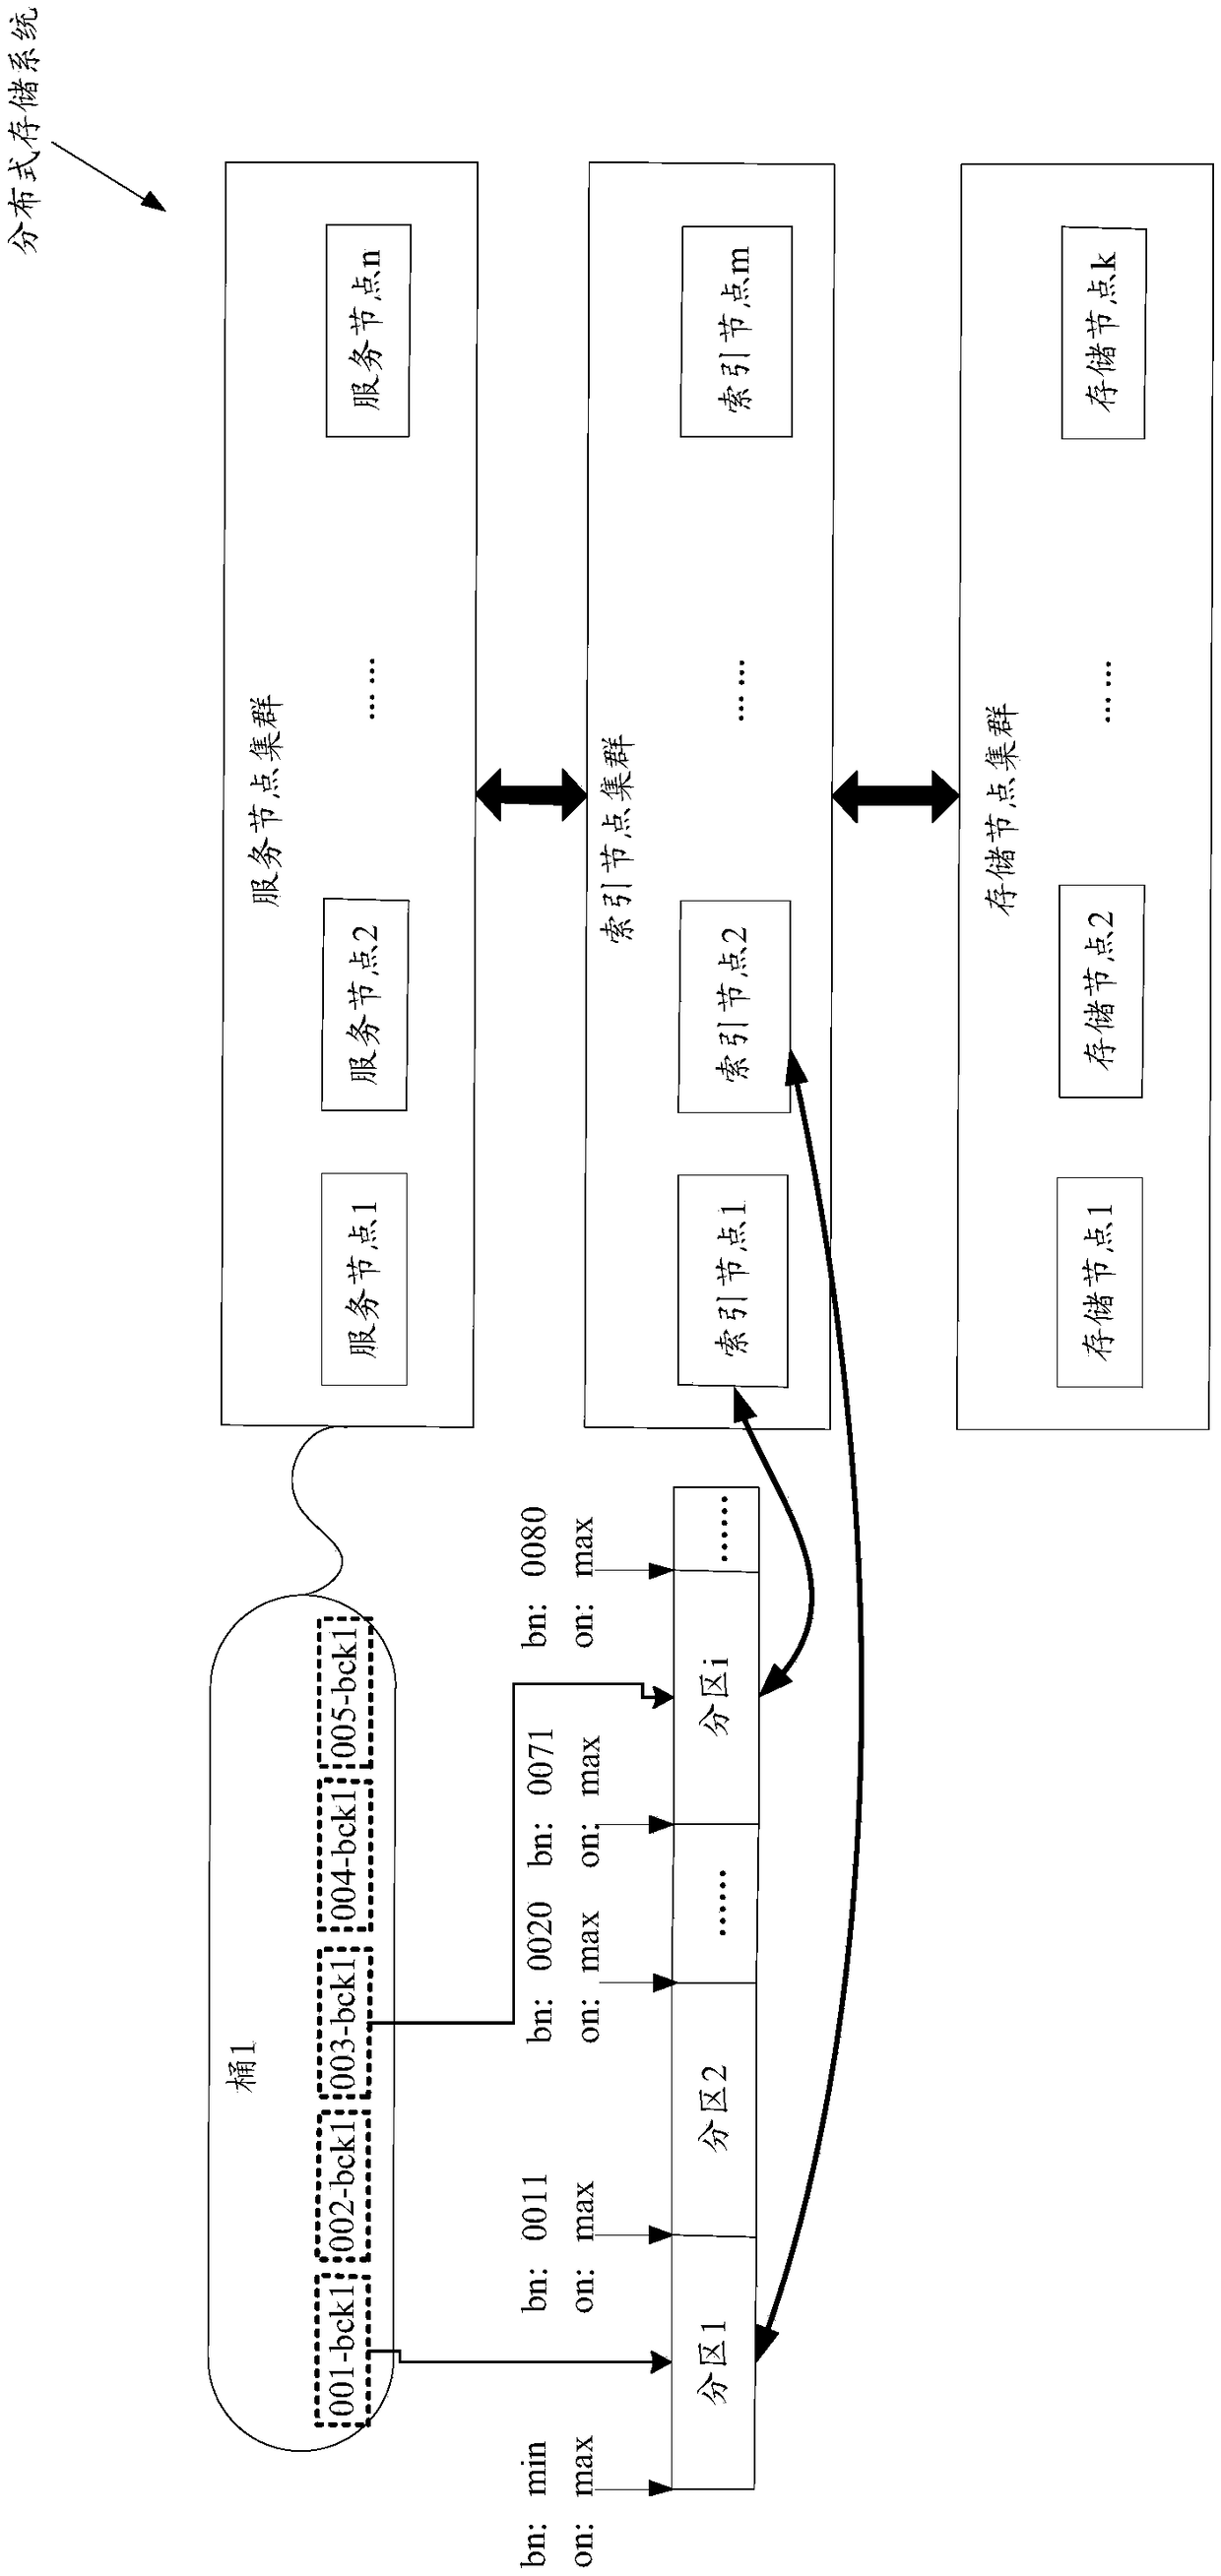 A method and apparatus for processing metadata of an object in a distributed storage system